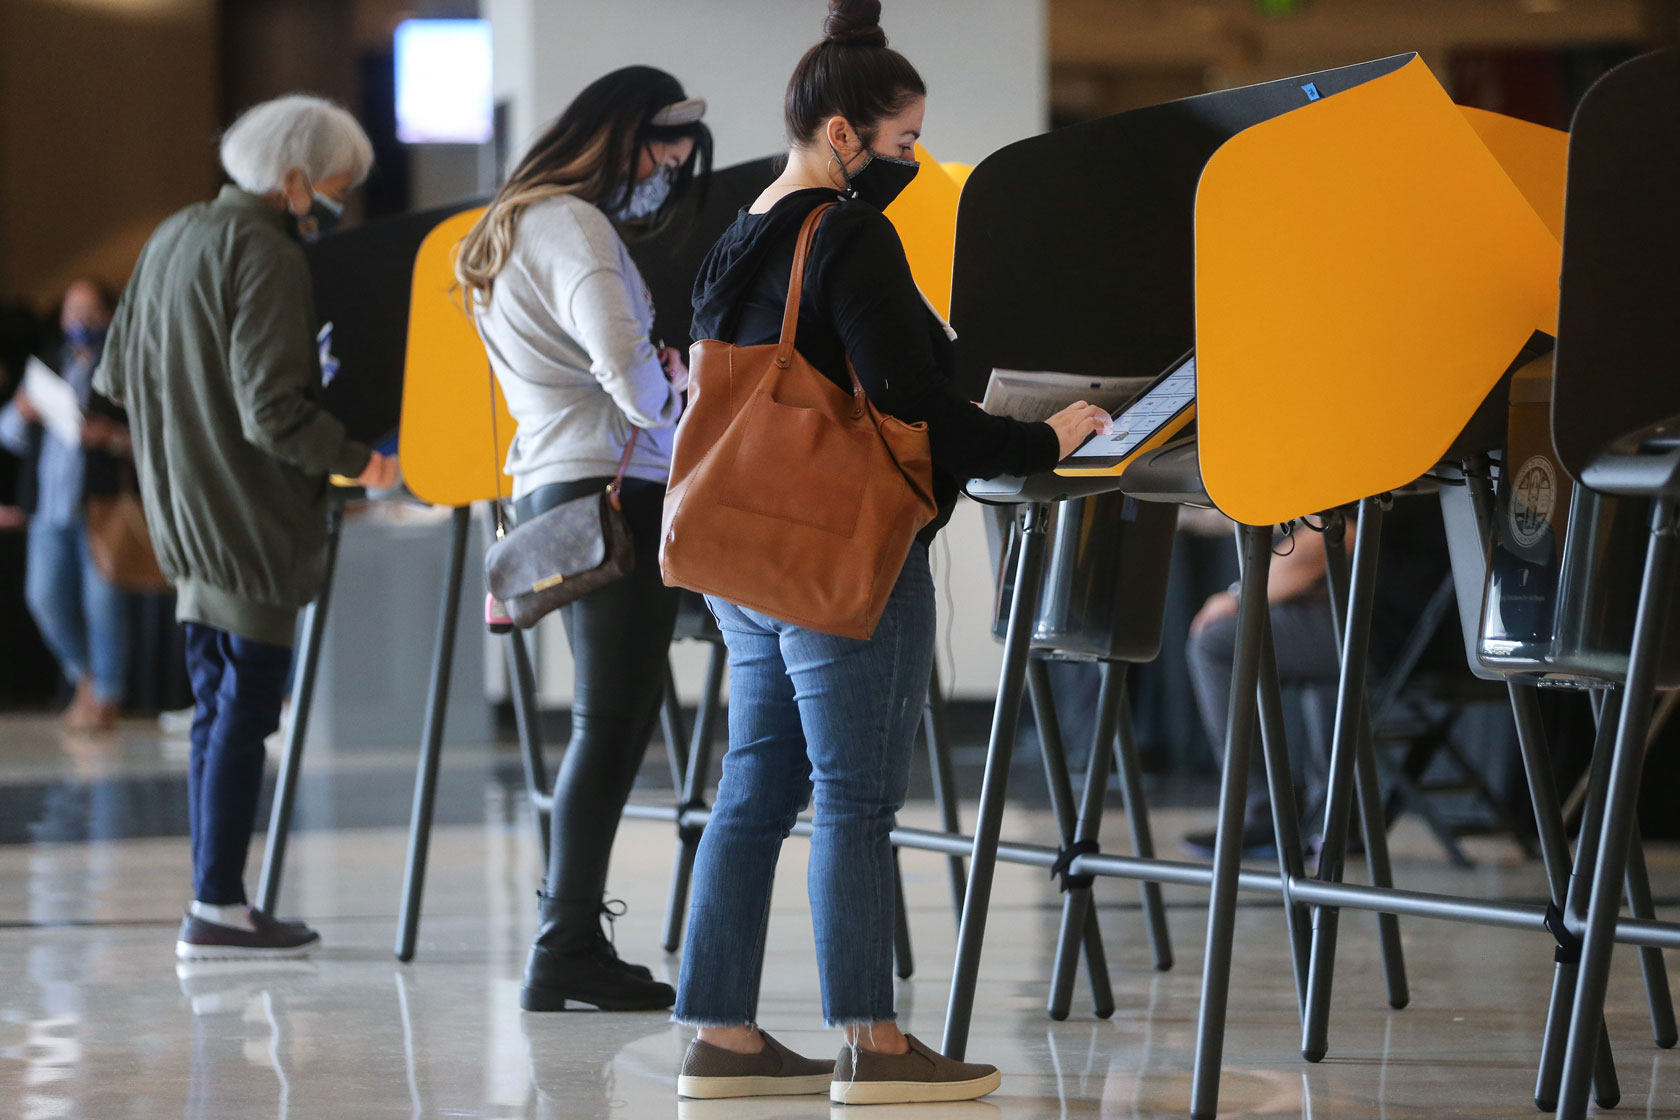 Voters mark their ballots at a voting center in Los Angeles on October 25, 2020.